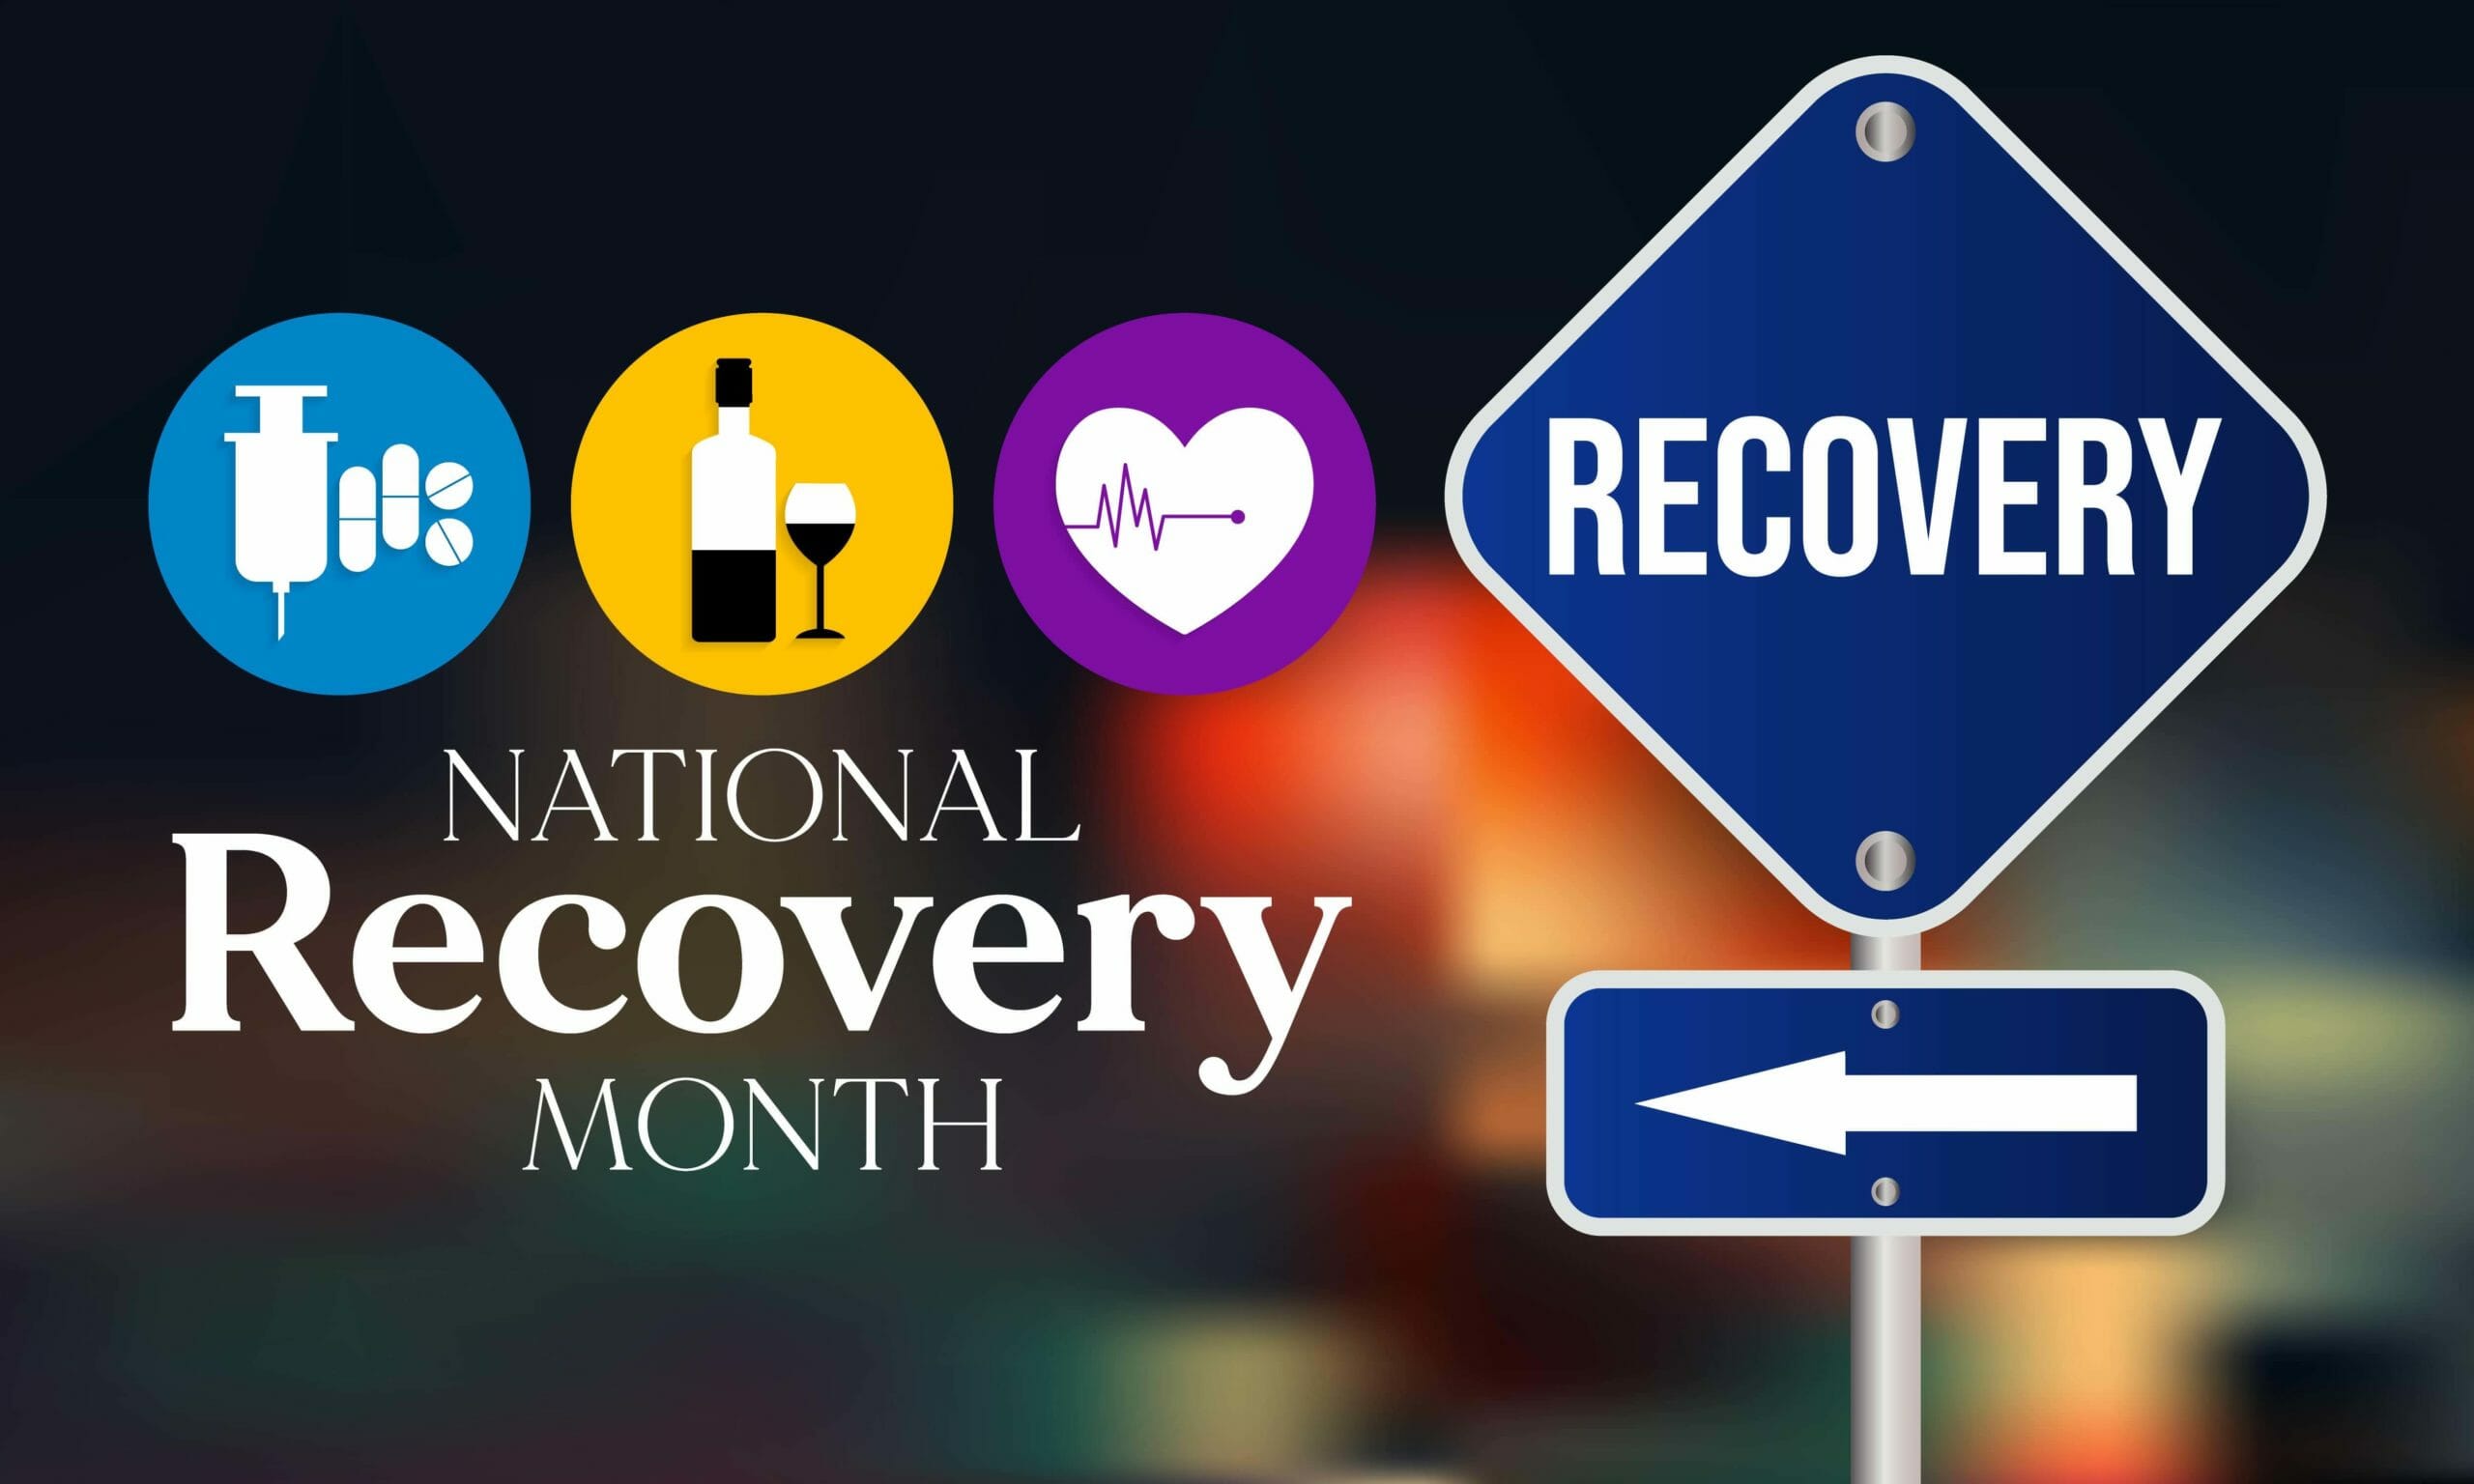 national recovery month 2021 banner